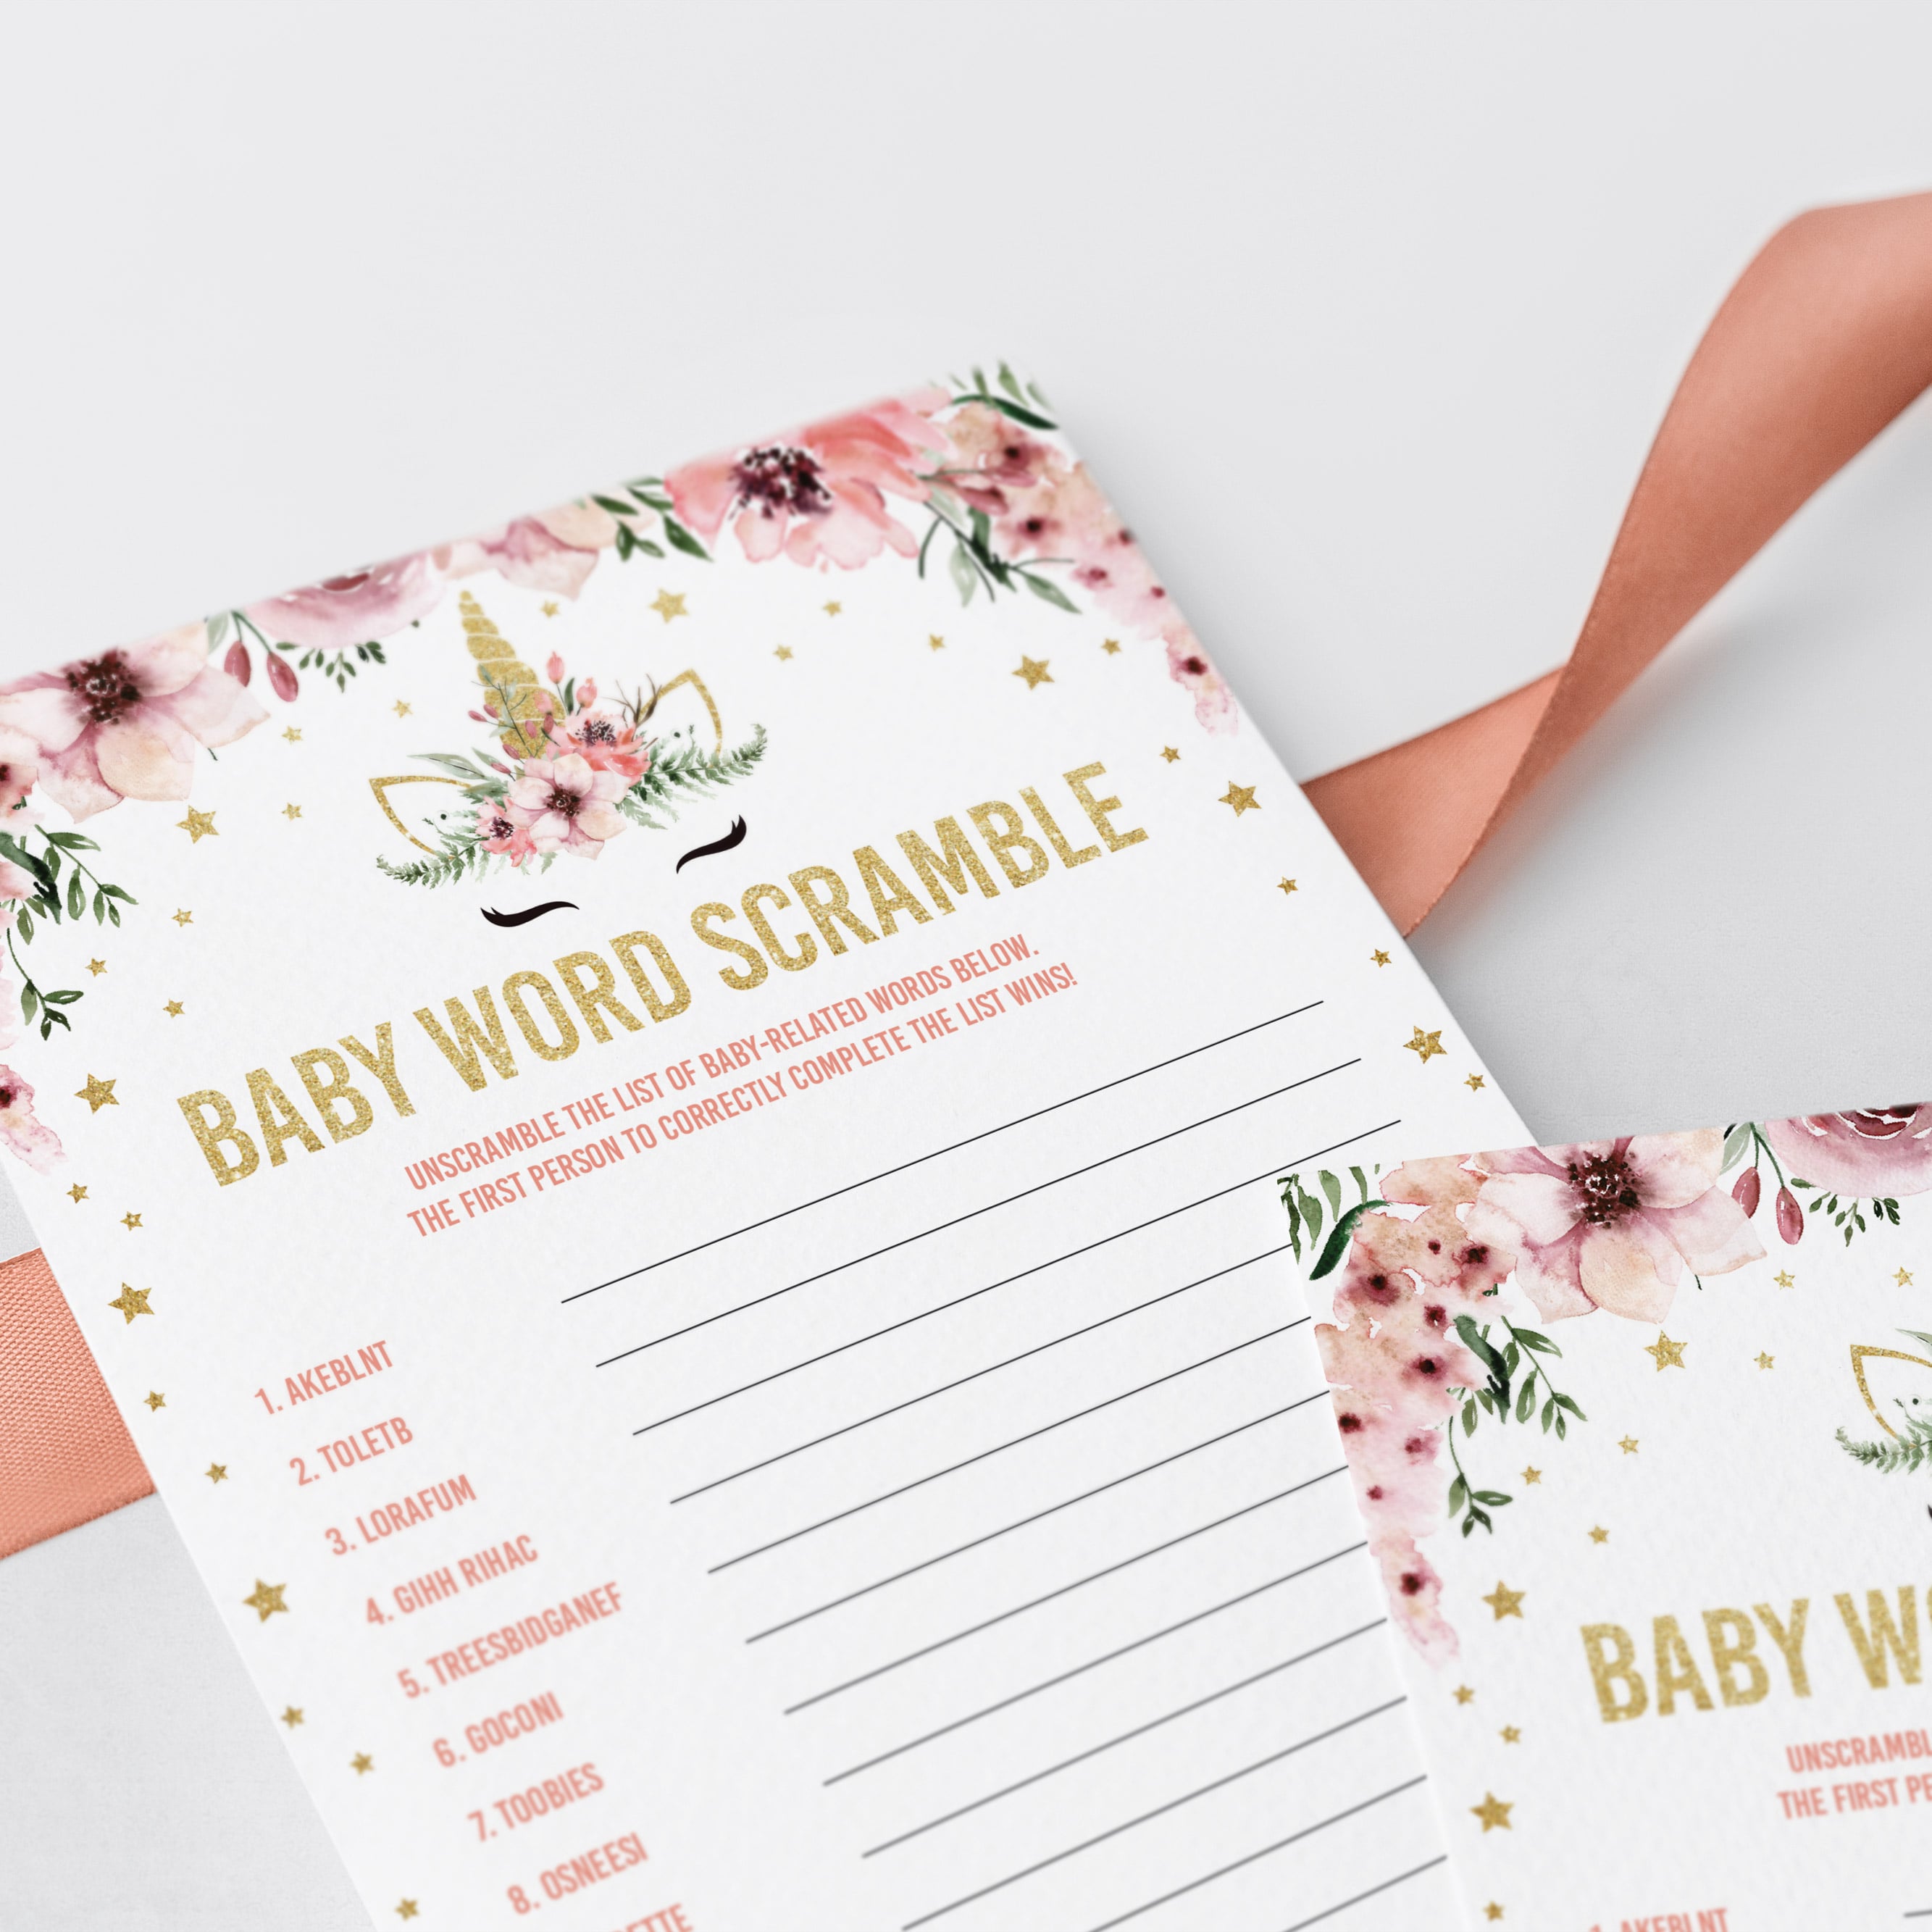 Unicorn themed baby shower games baby word scramble by LittleSizzle